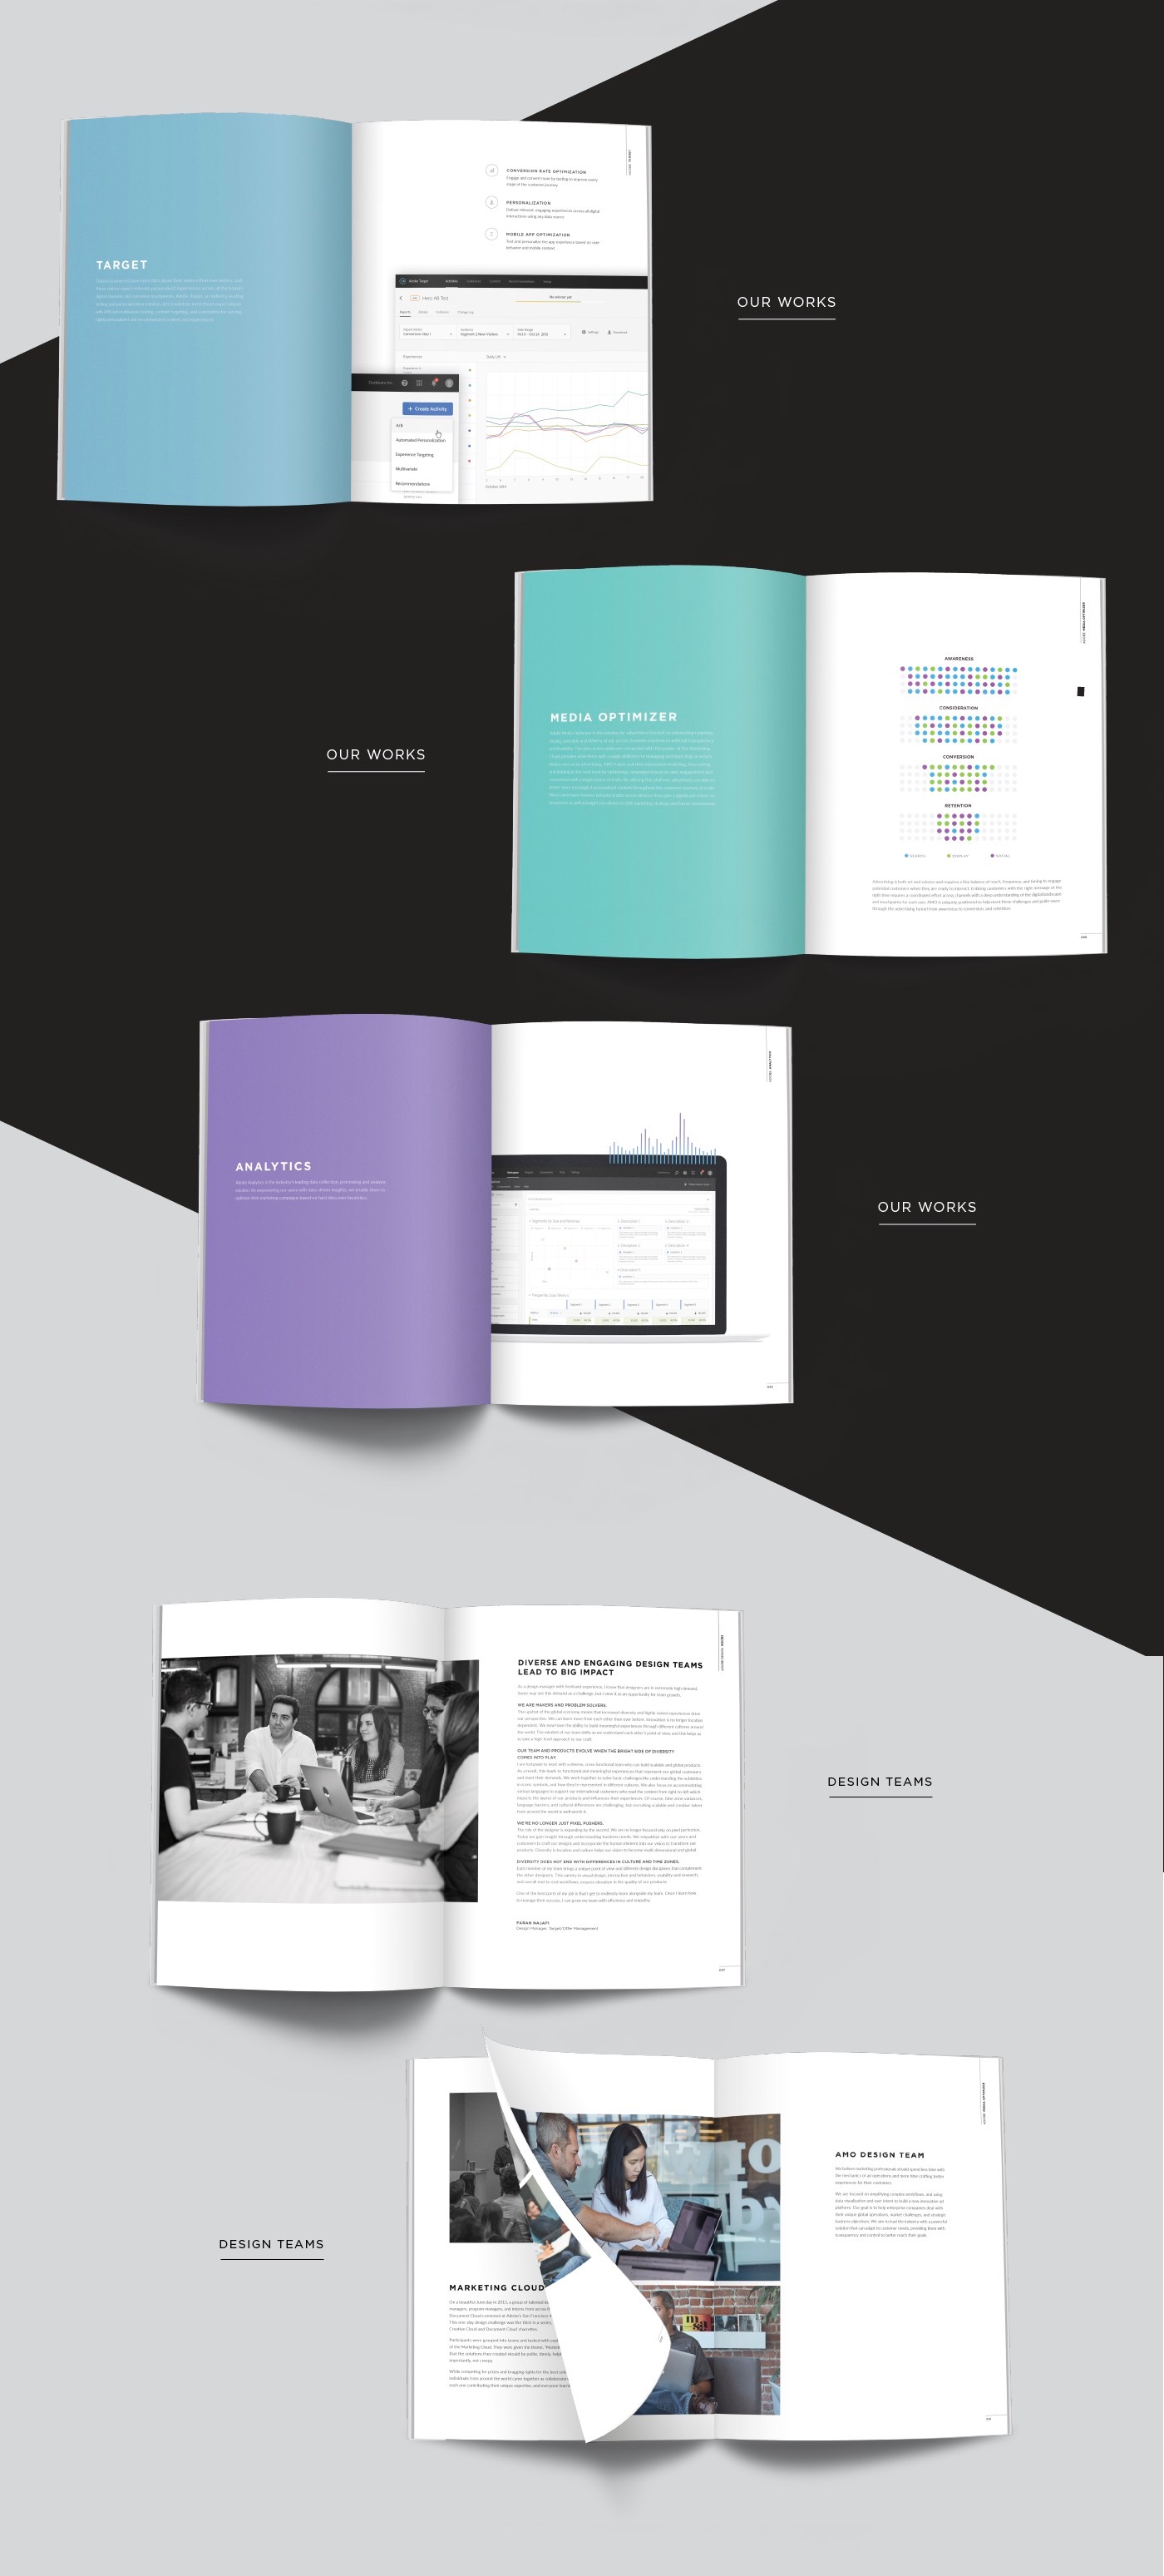 Interior Spreads from the Adobe Design Marketing Cloud Annual Report